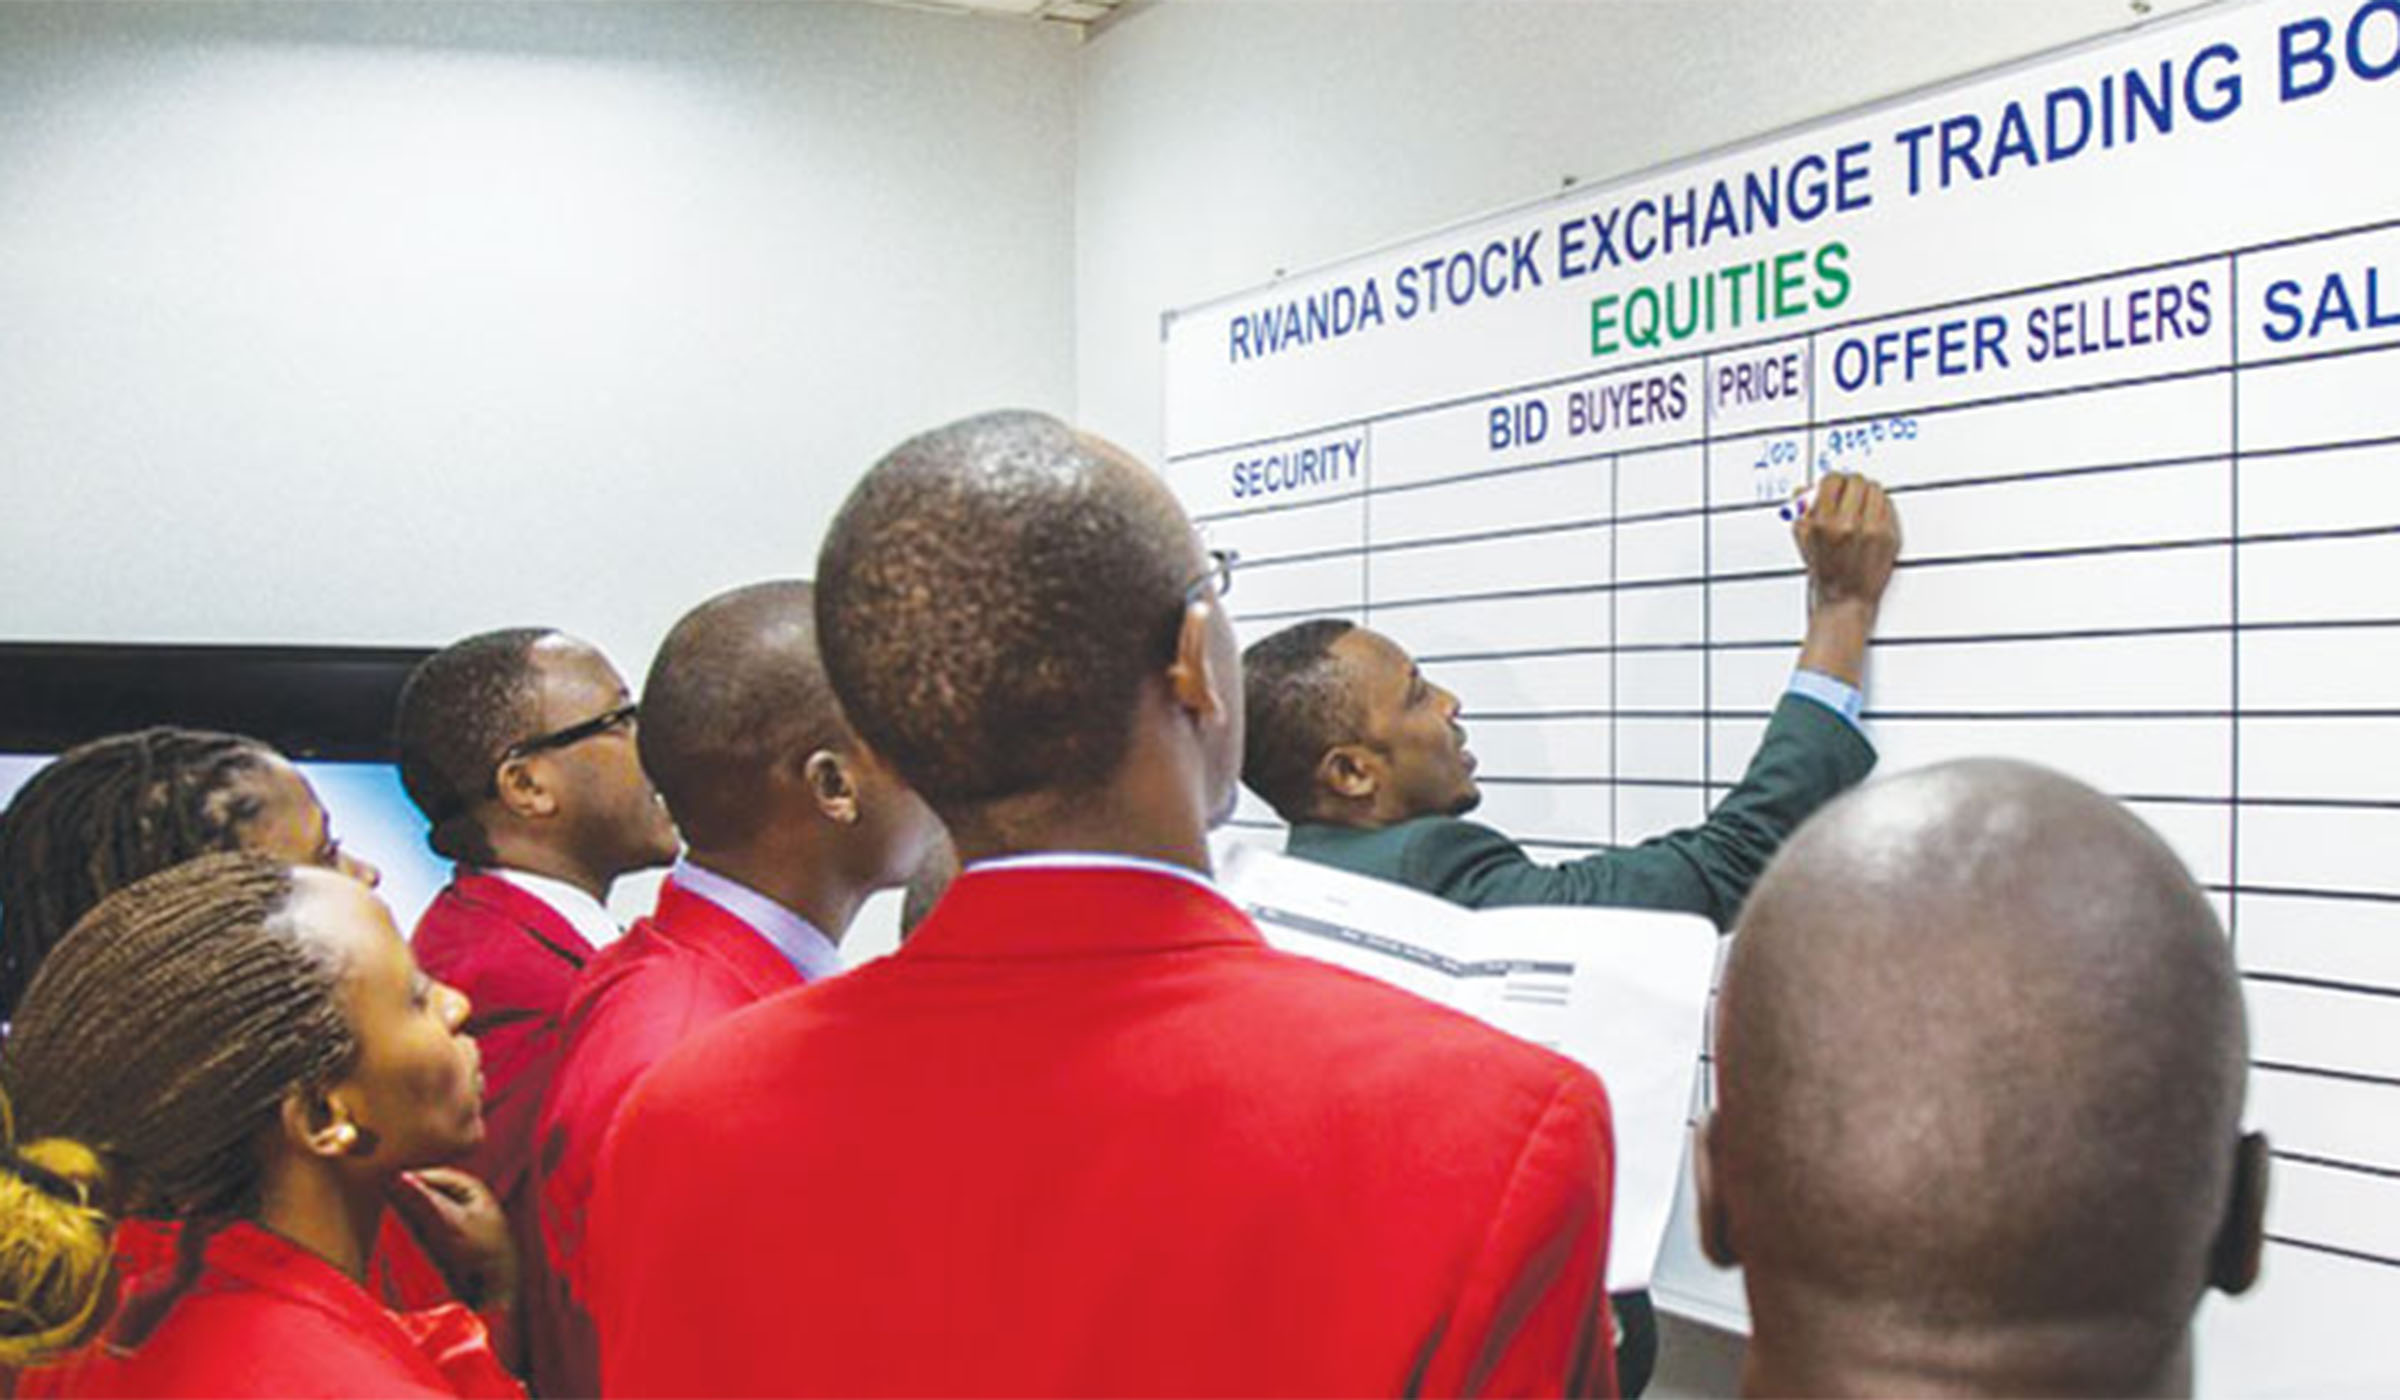 Statistics from the Rwanda Stock Market show that equities and bonds worth Rwf 436.5bn have been issued on the local market. Net photo.